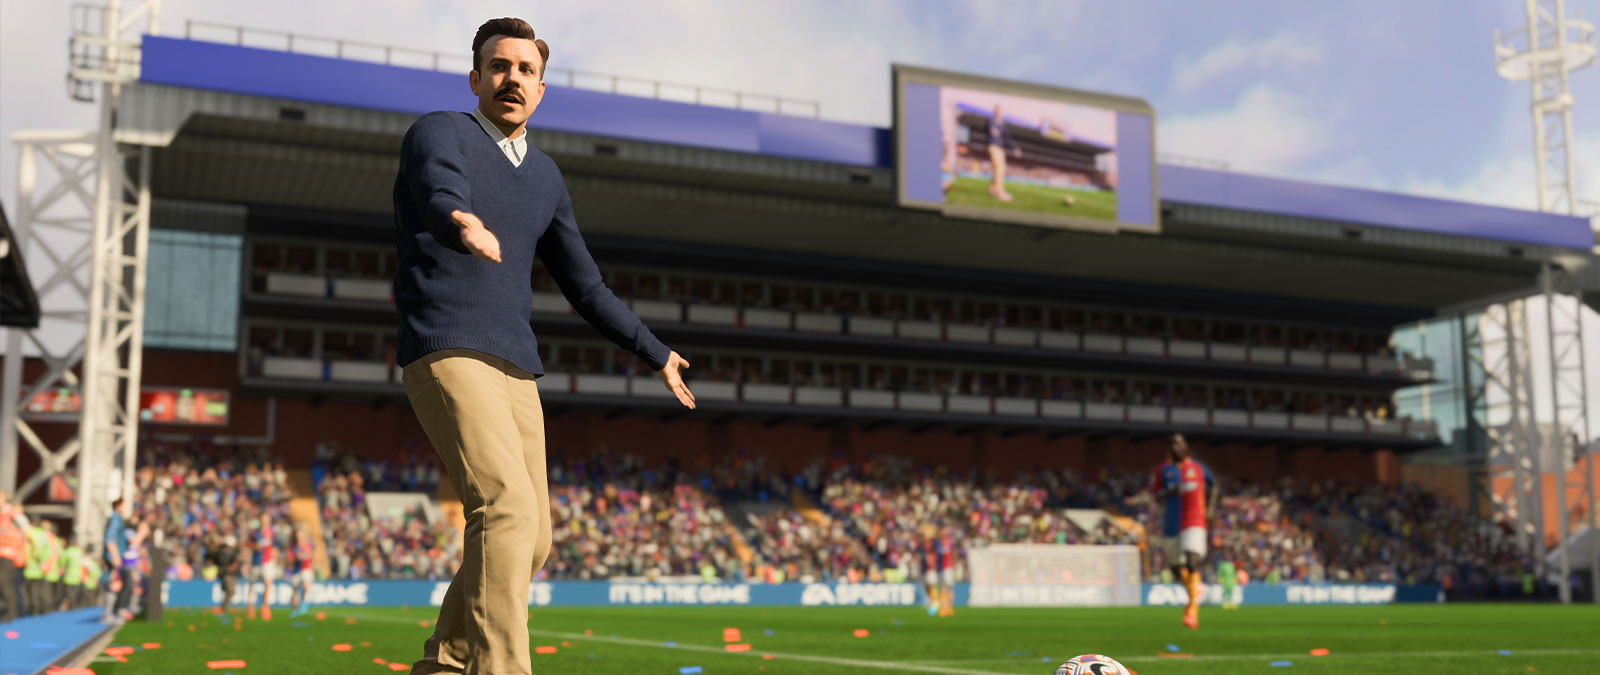 Ted Lasso holds his arms out in confusion on the soccer field while approaching the ball.